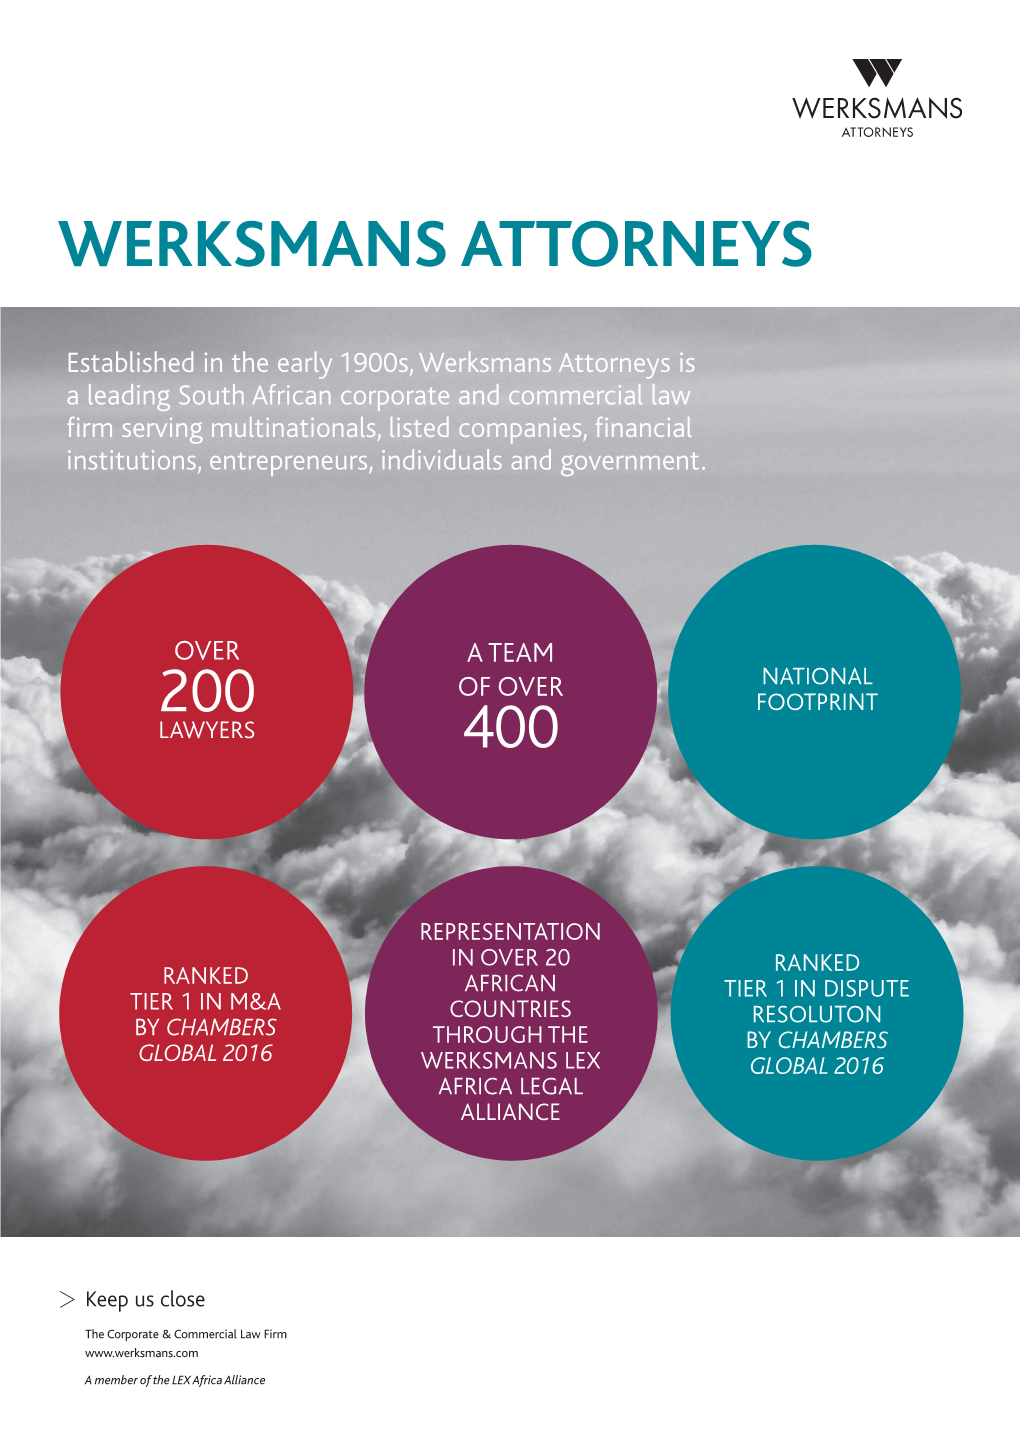 Werksmans Stays One of the Favourites”